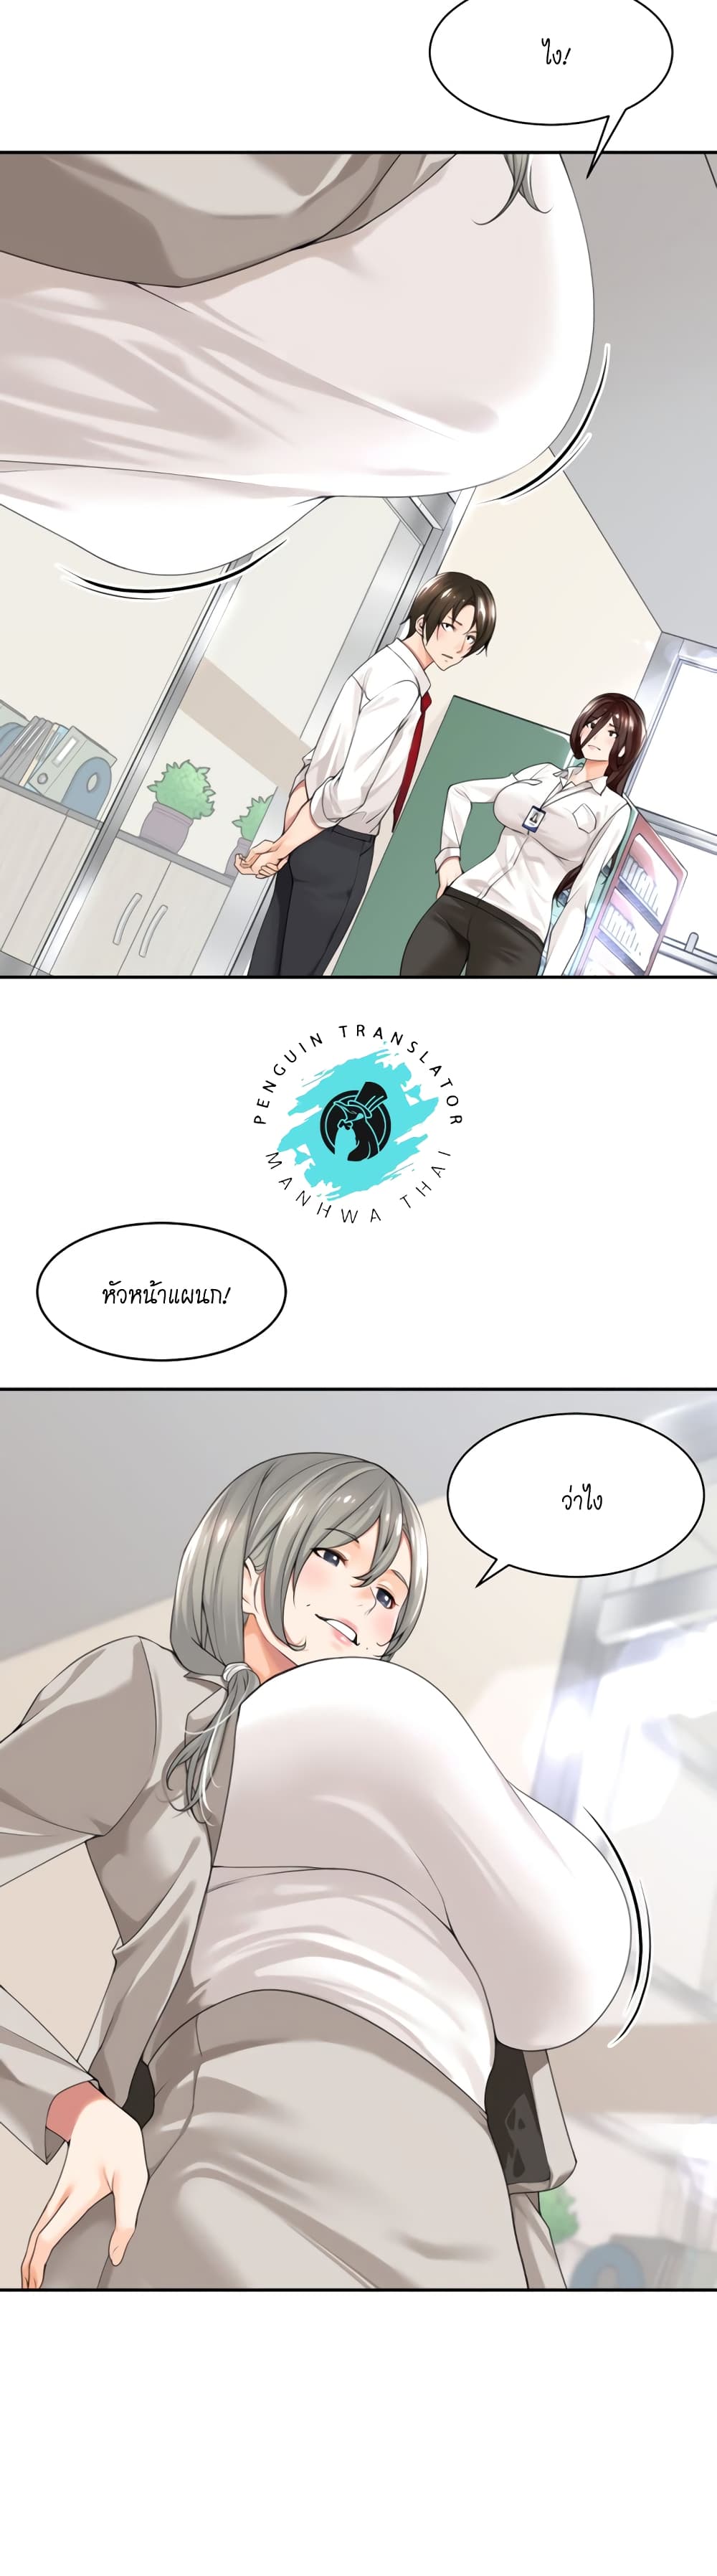 Manager, Please Scold Me ตอนที่ 1 ภาพ 13